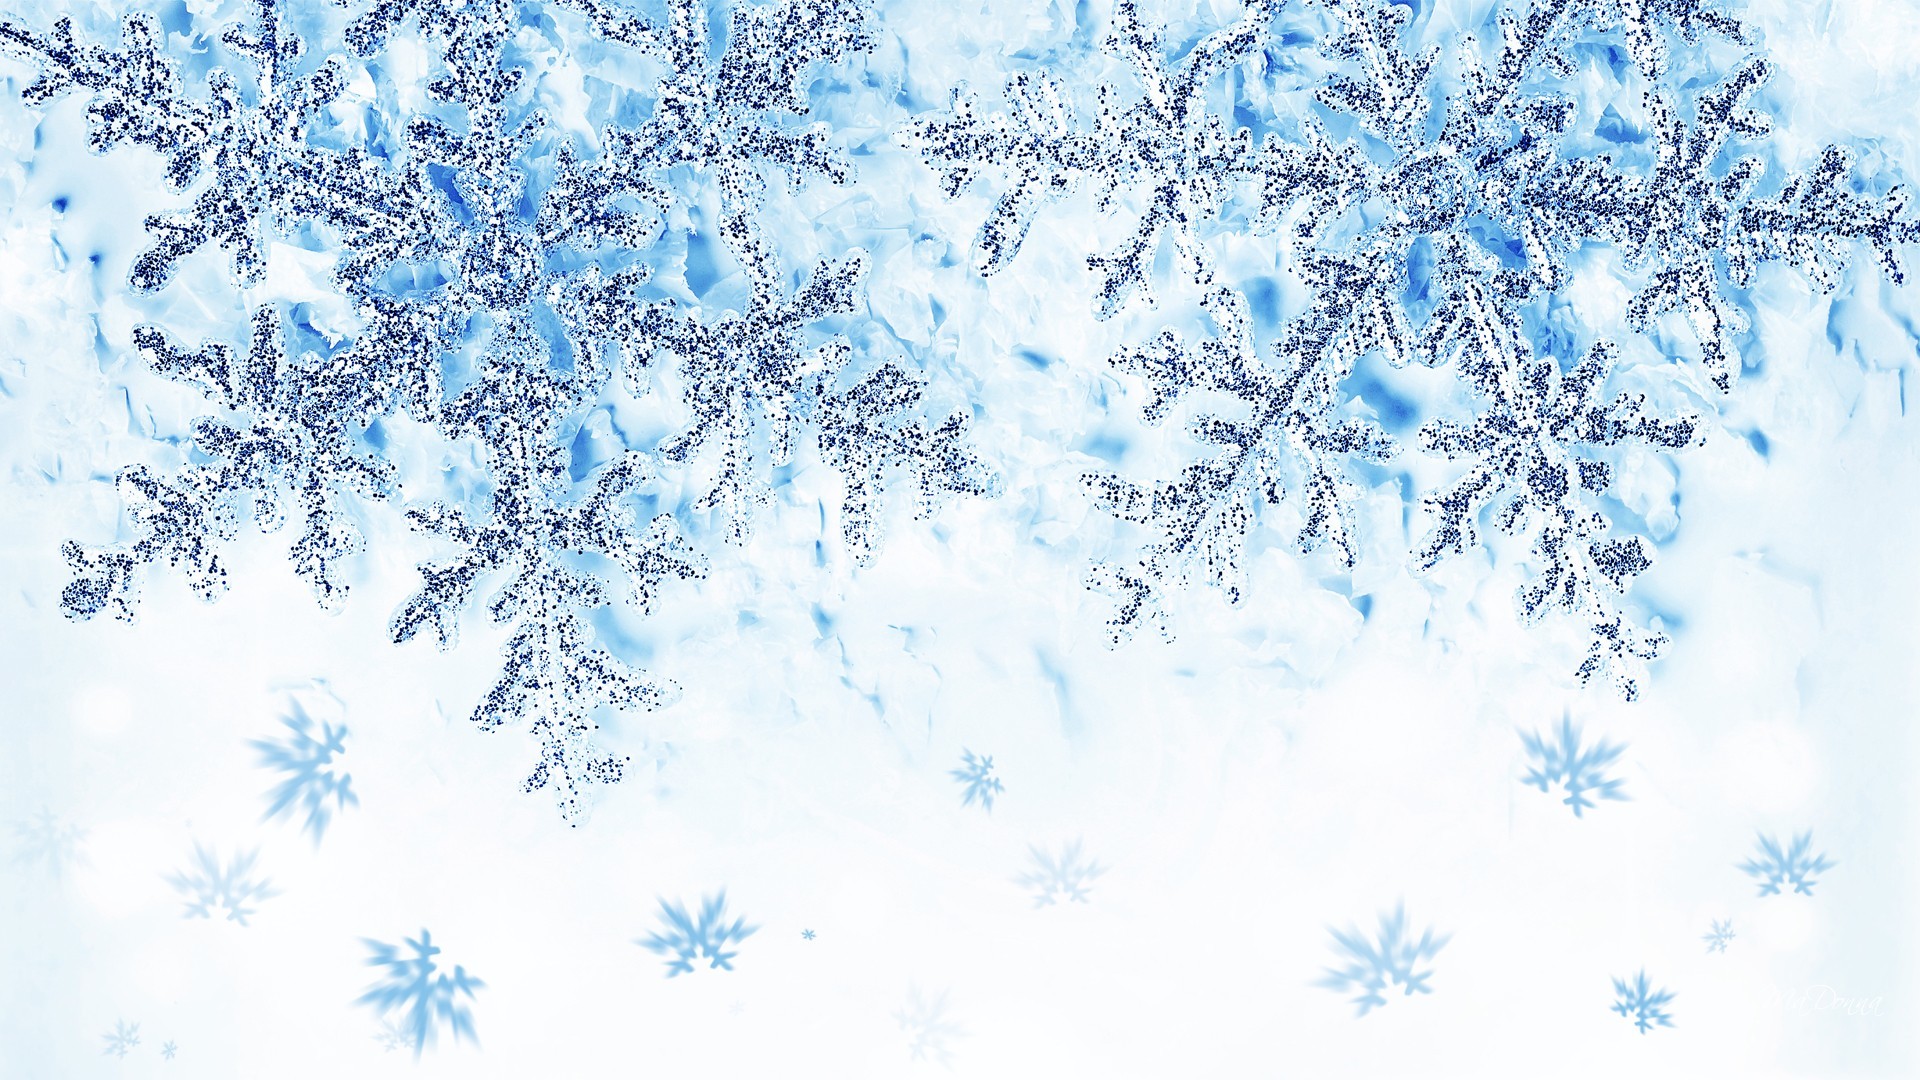 1920x1080 Snowflakes Blue Wallpaper Full HD #491  px 675.35 KB Other  background blue desktop green